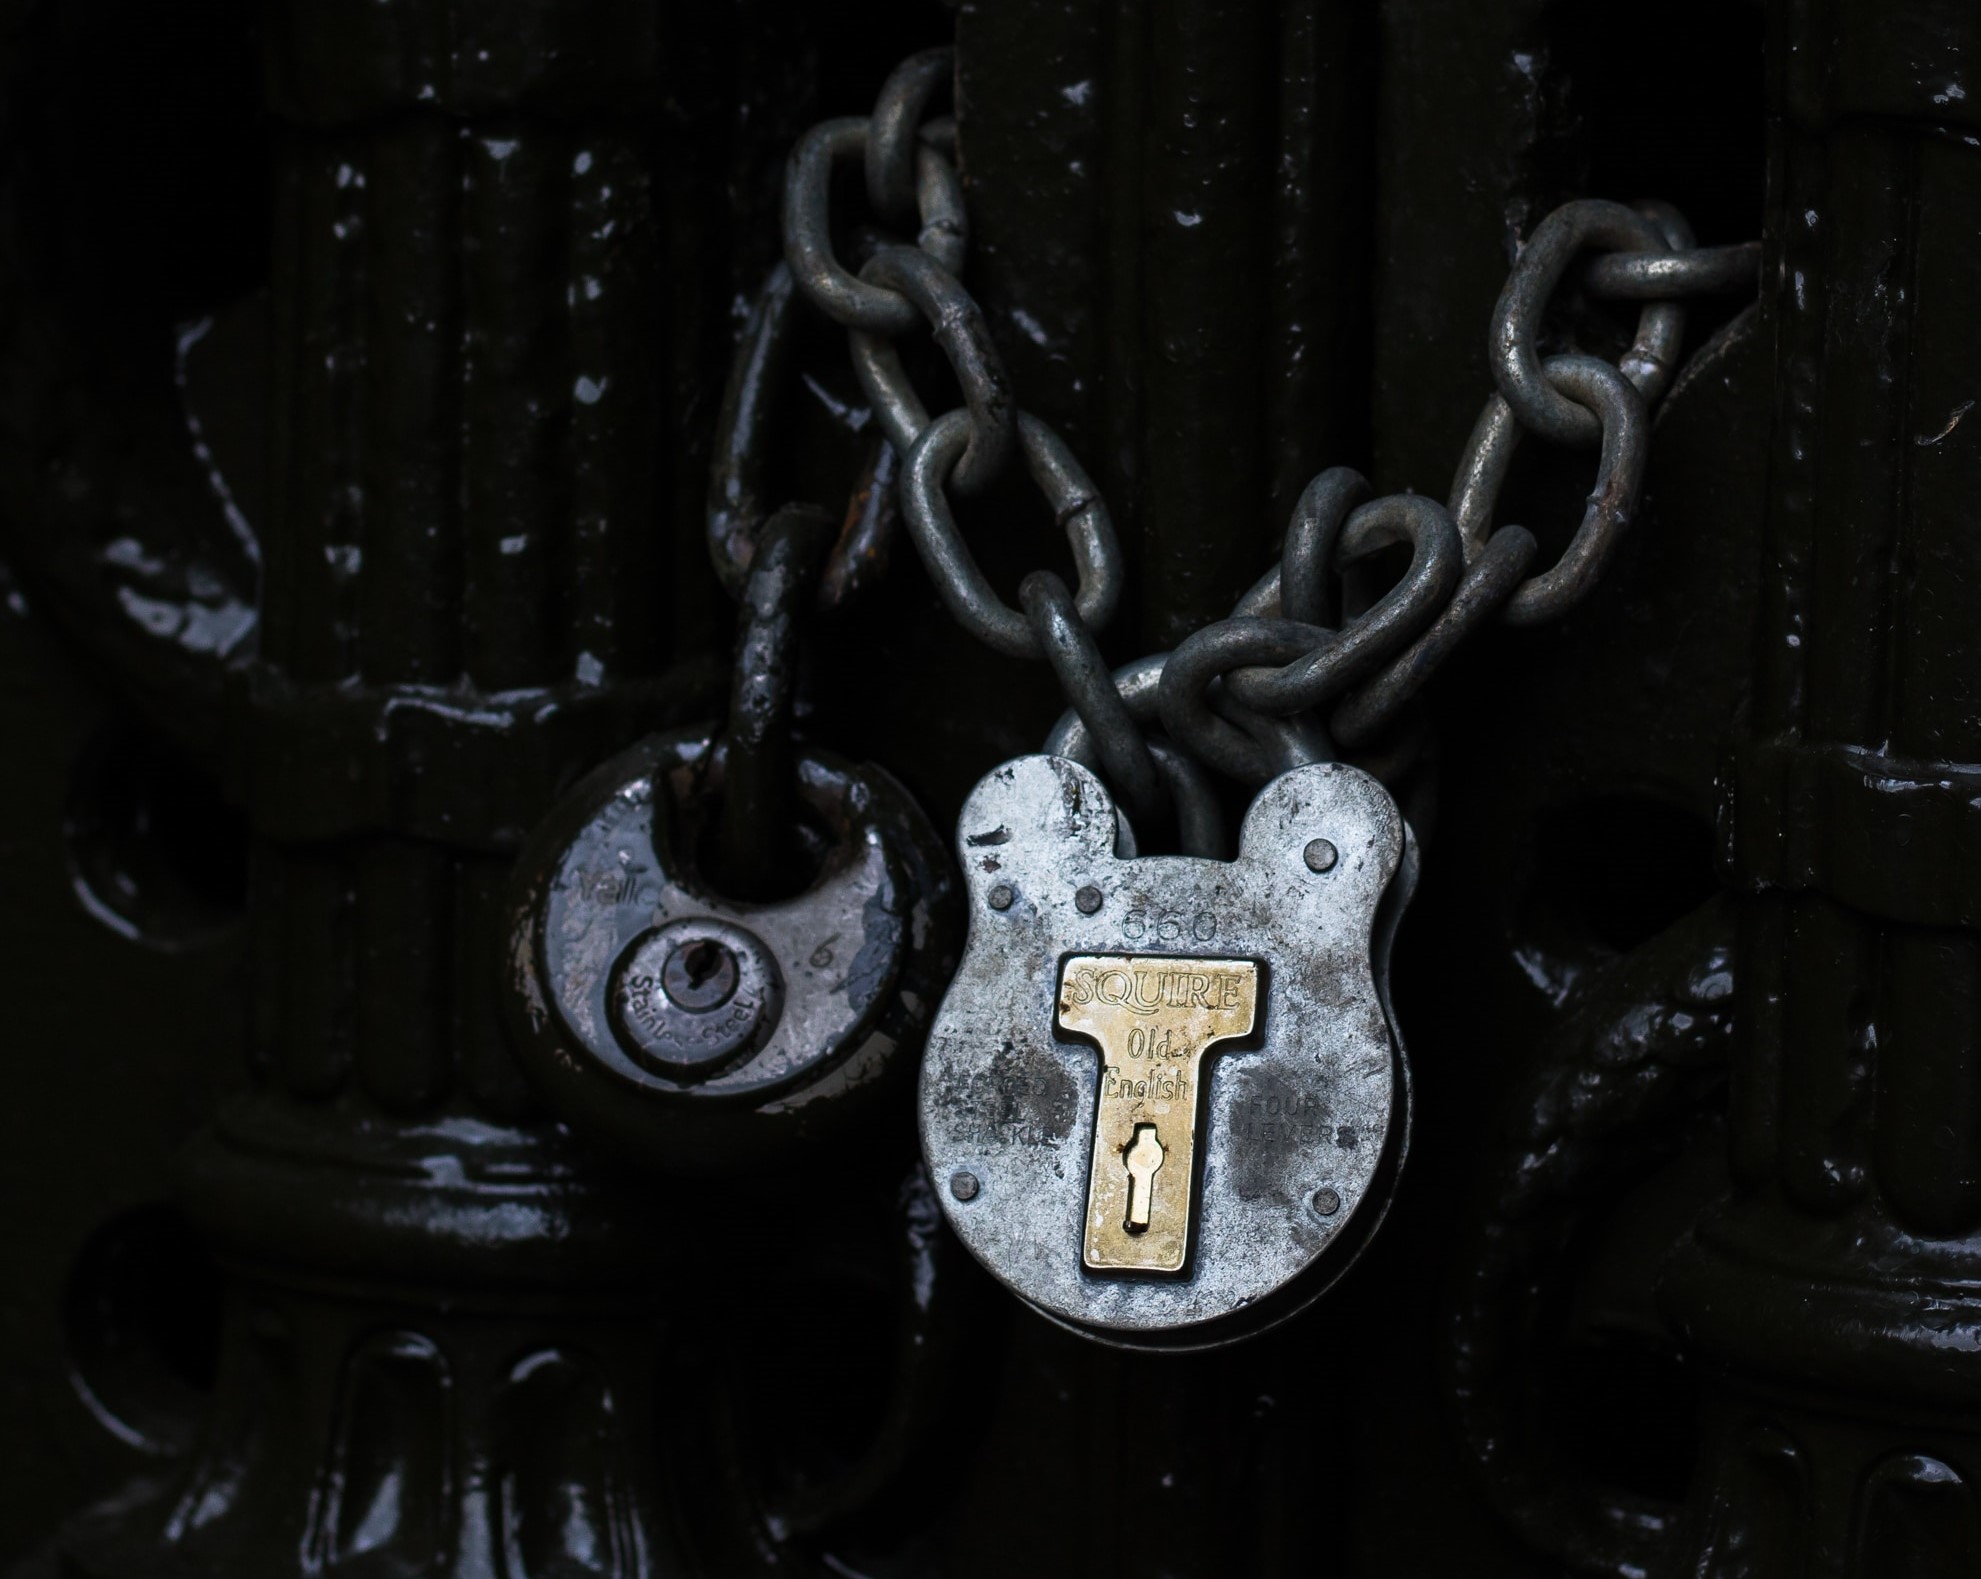 a close-up of a key chain